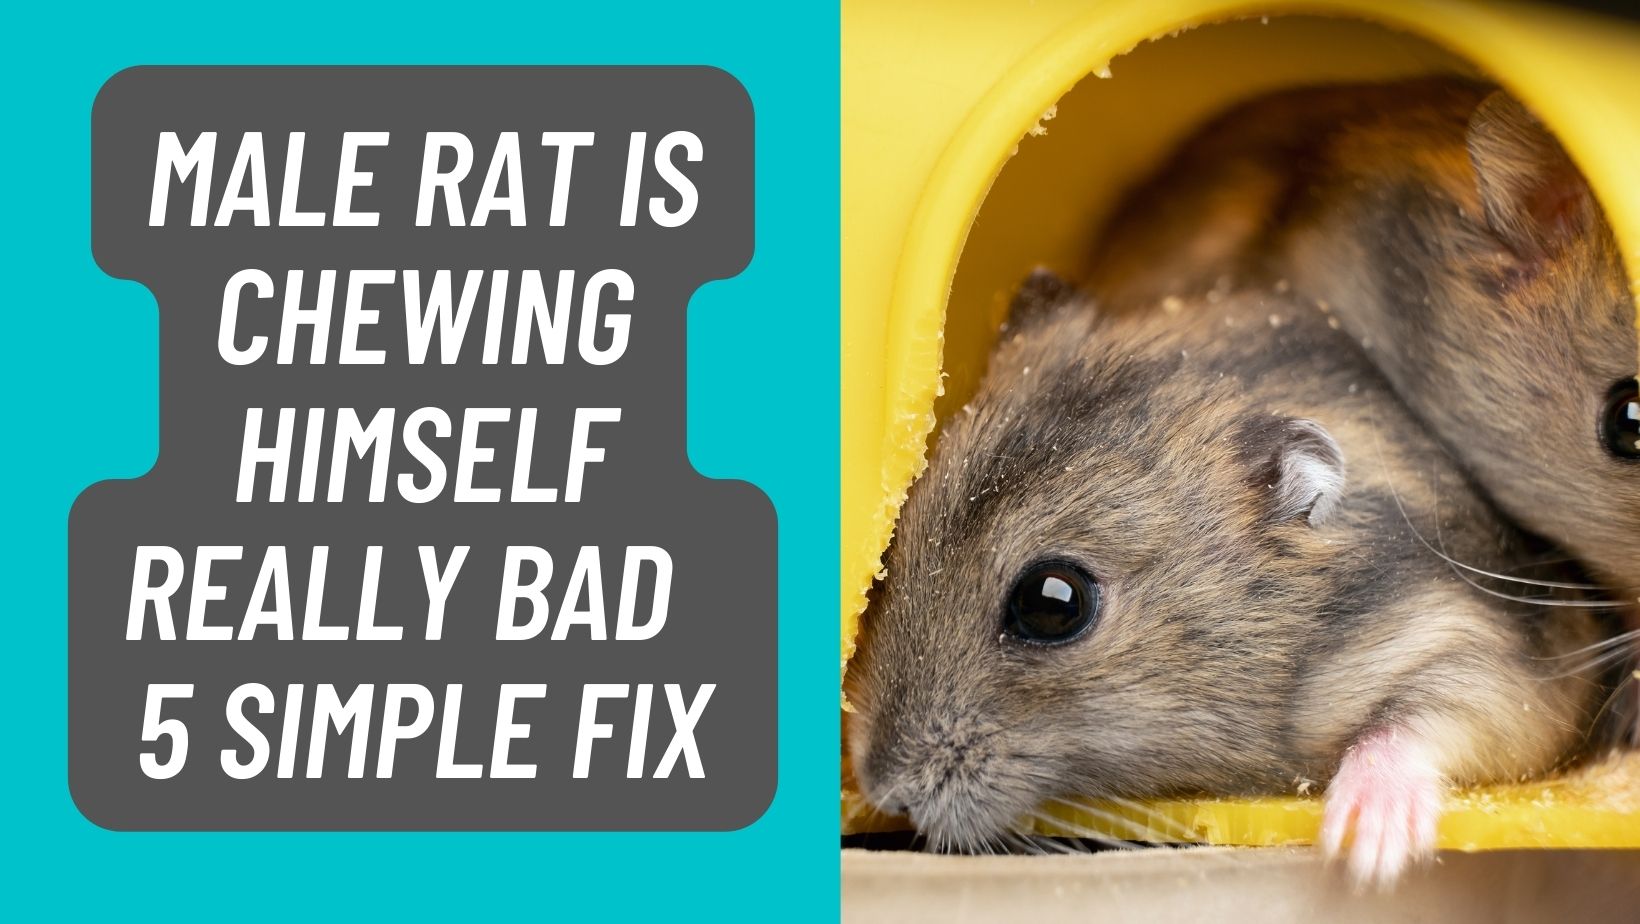 My Male Rat is Chewing himself really Bad – 5 SIMPLE FIX!